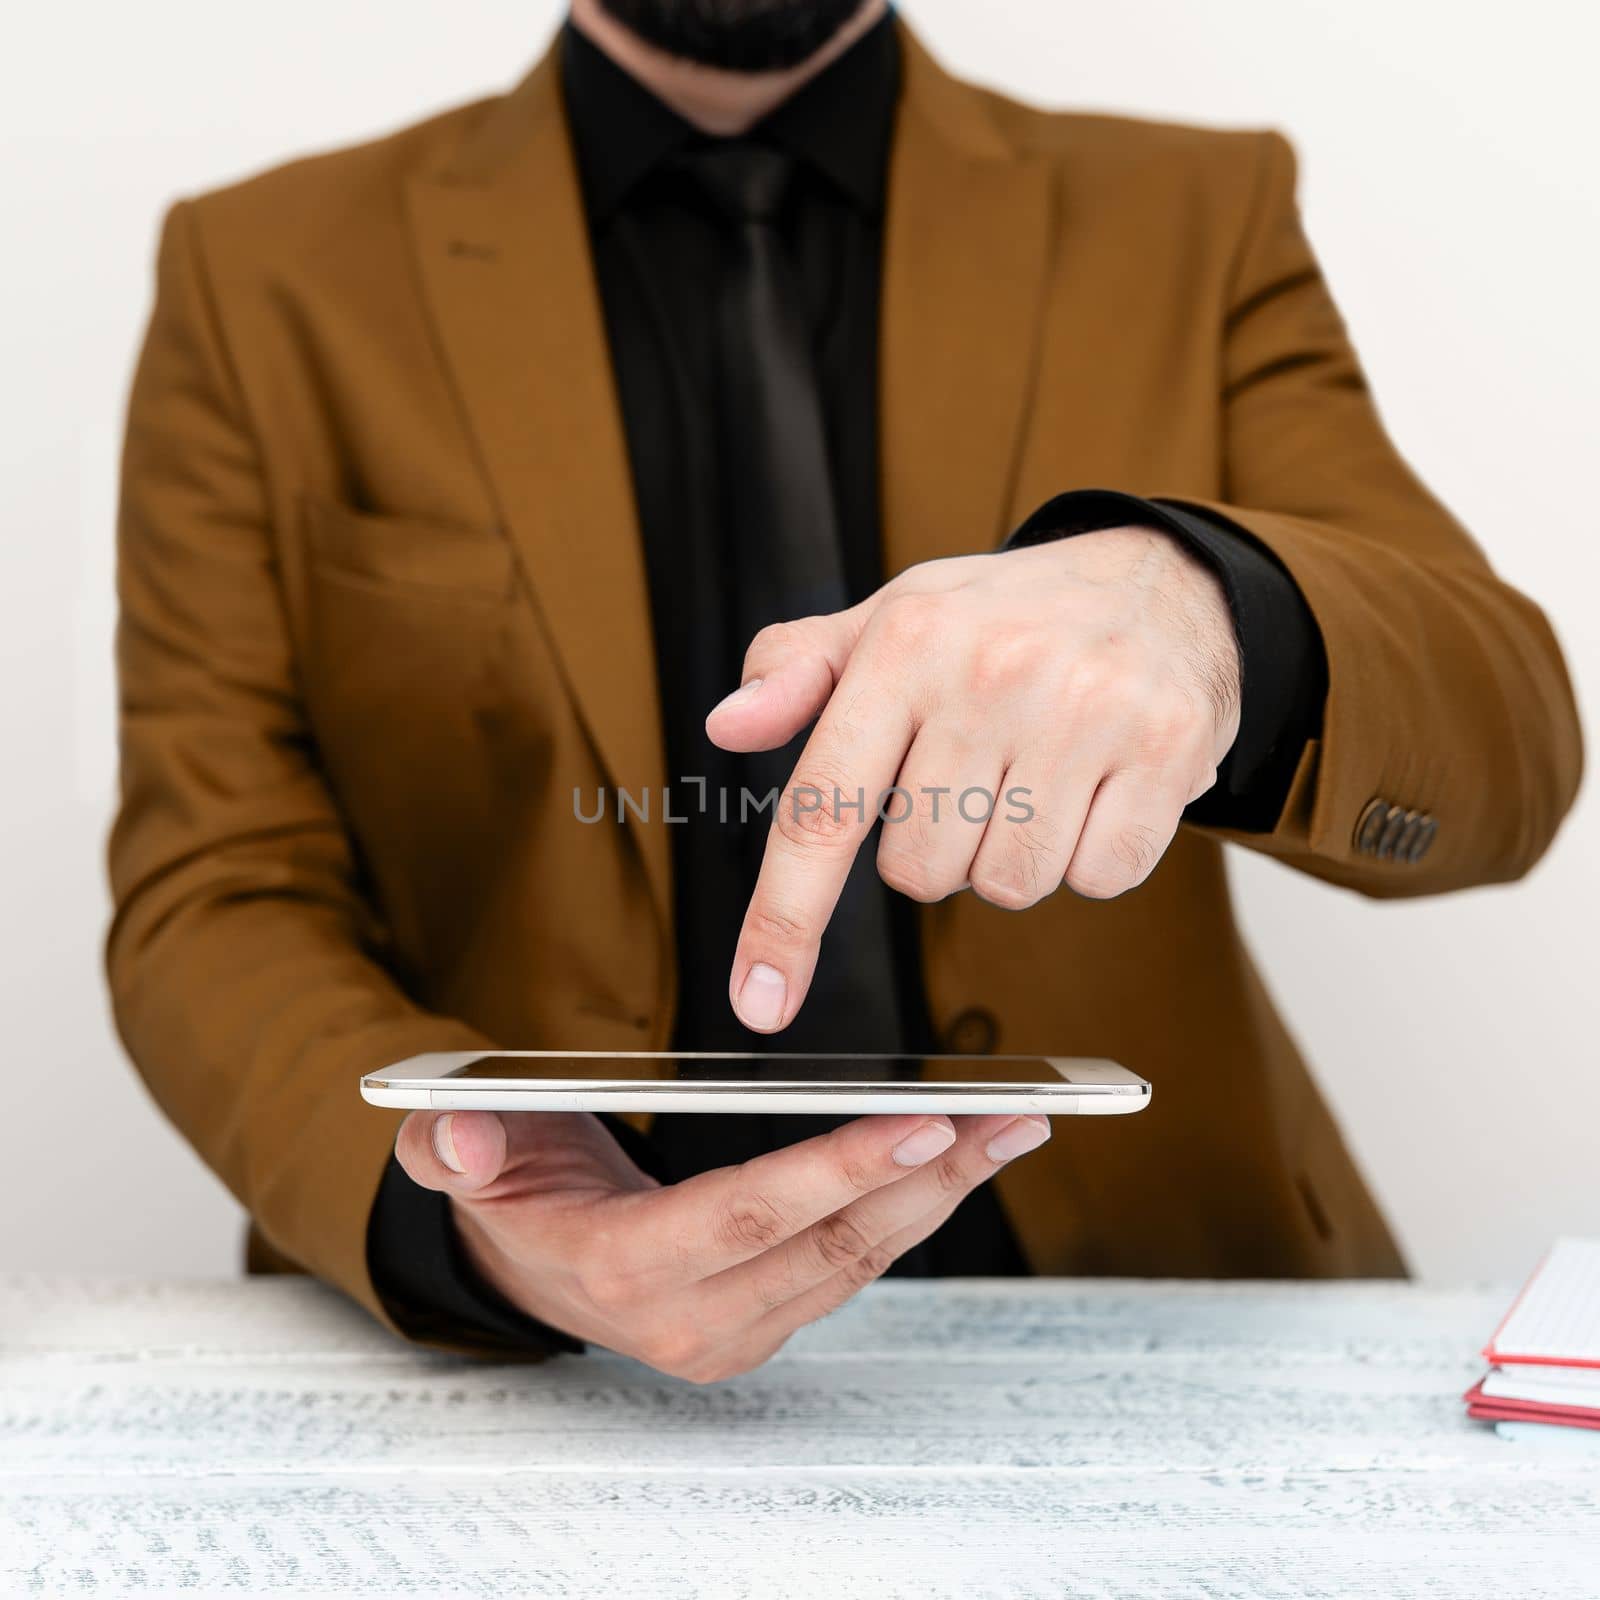 Businessman in a Brown jacket sitting at a table holding a mobile phone